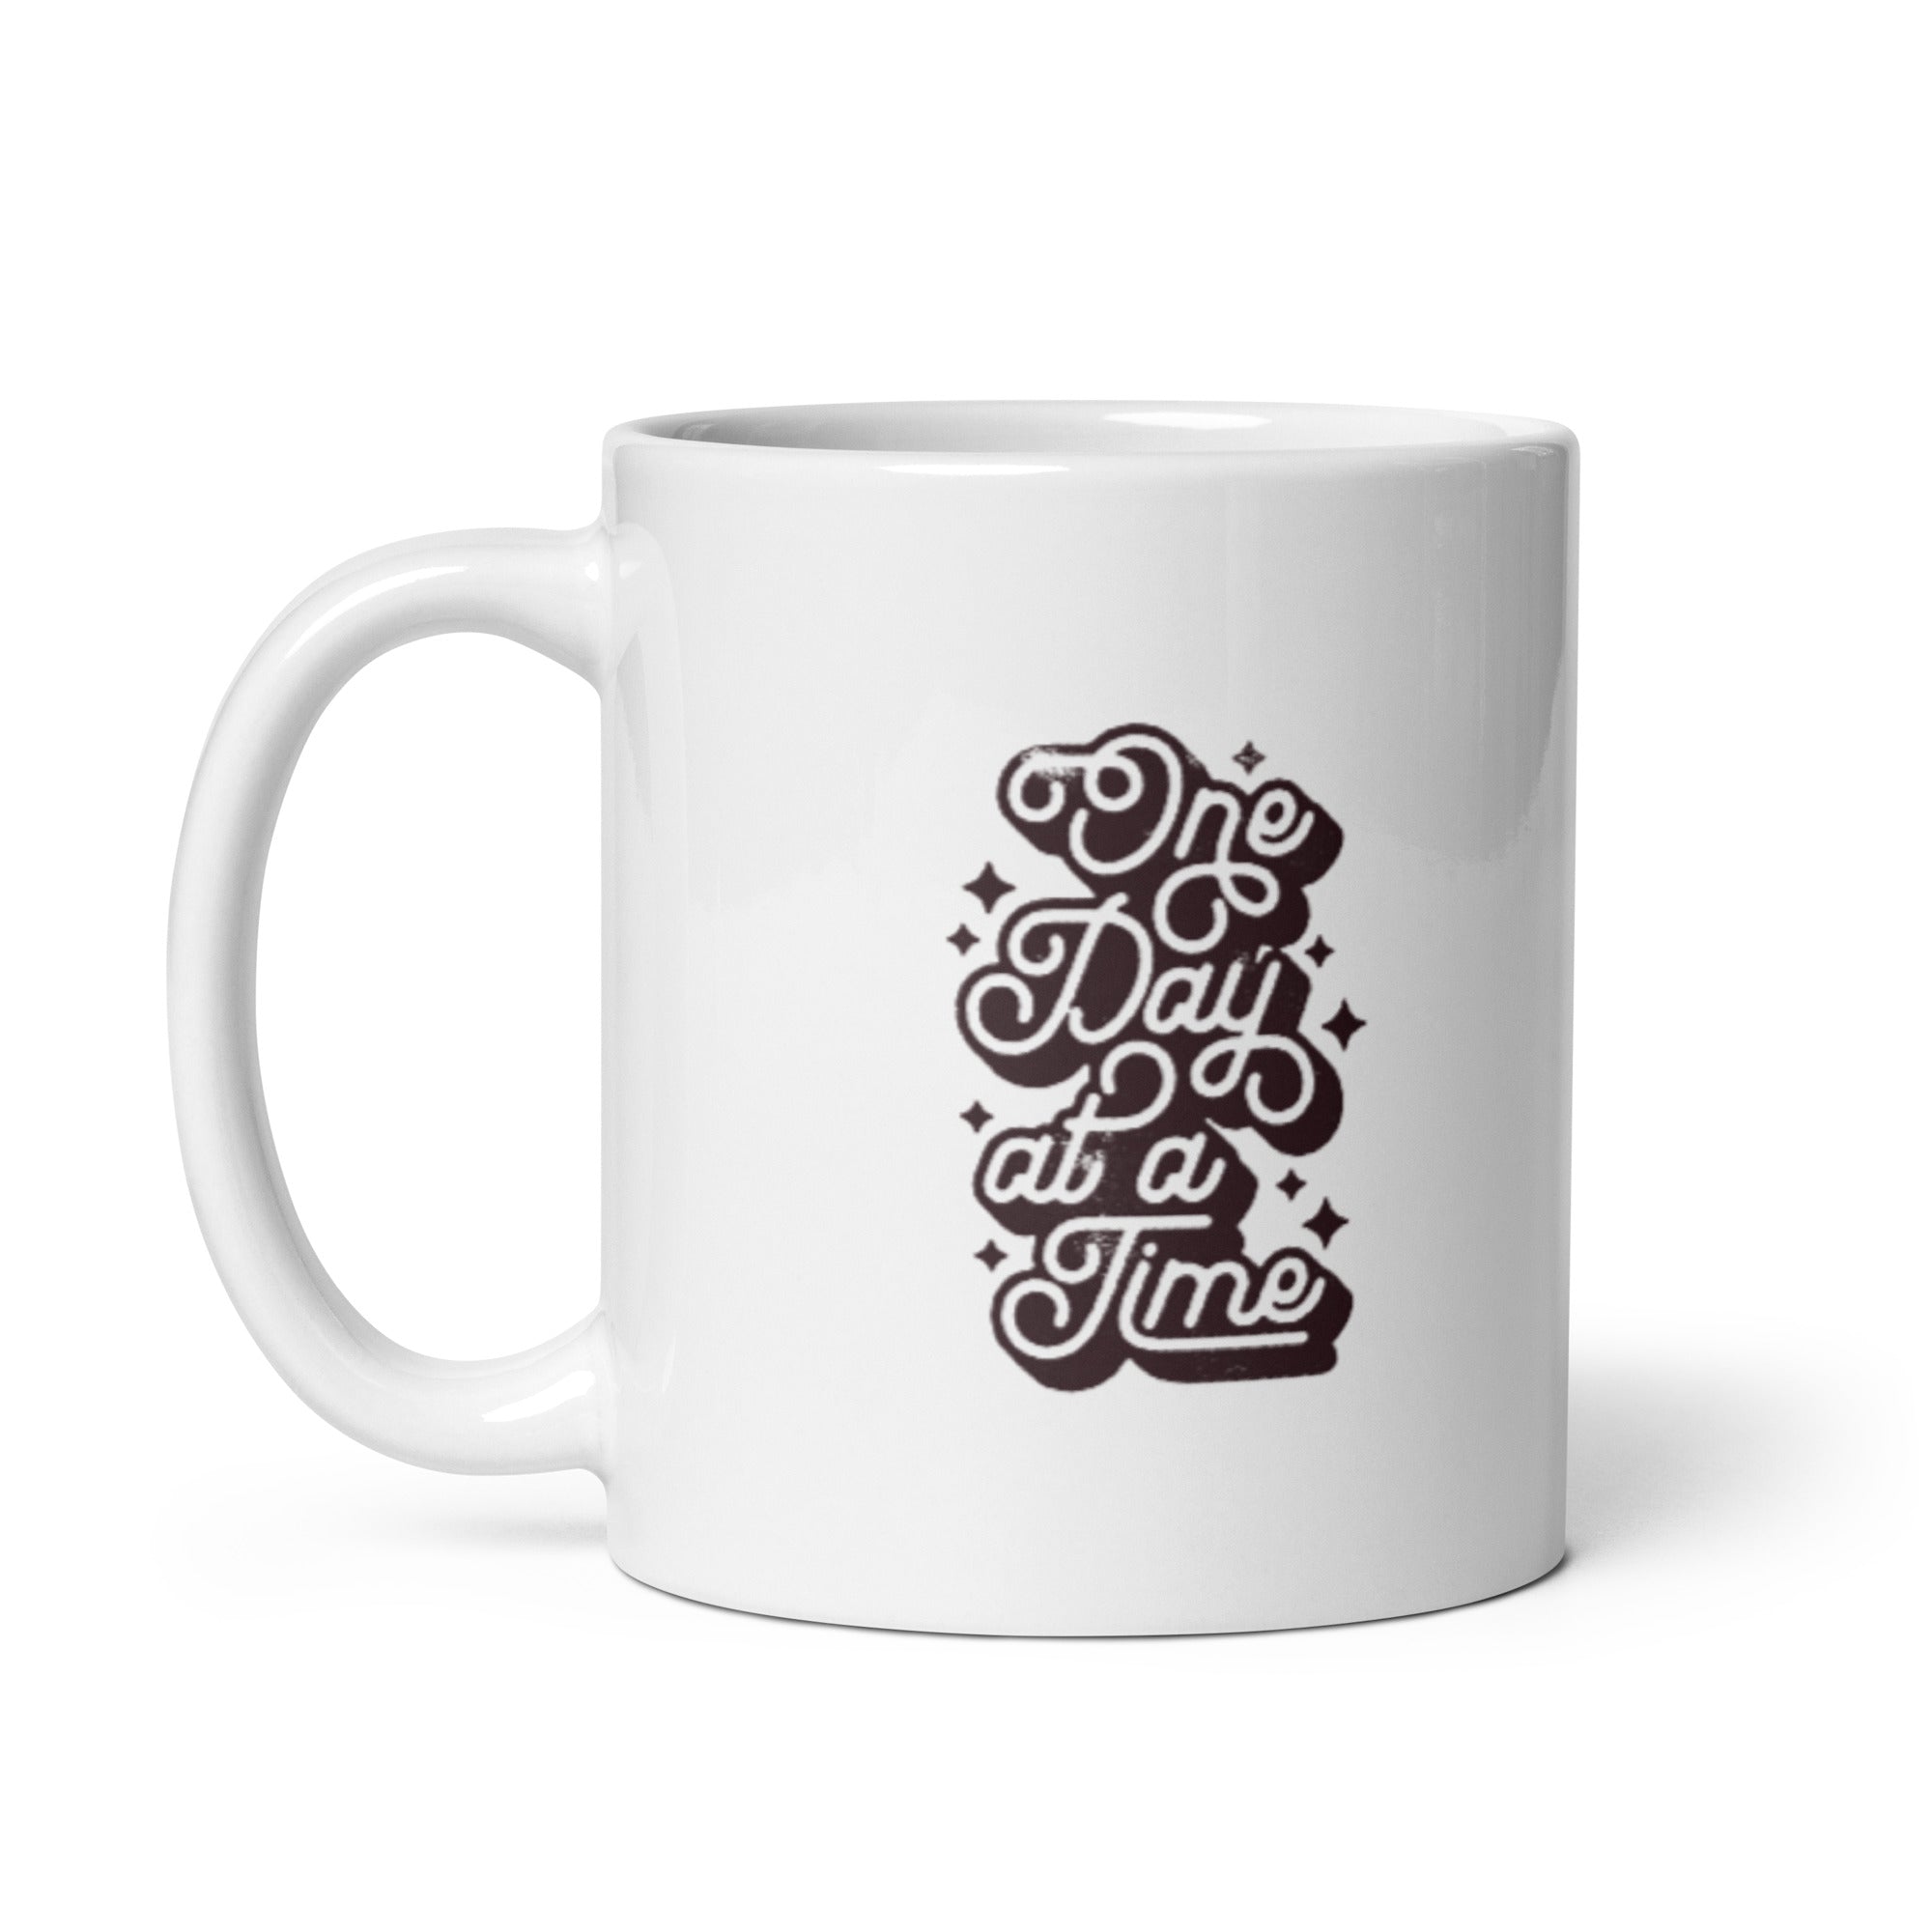 One Day At A Time - White glossy mug